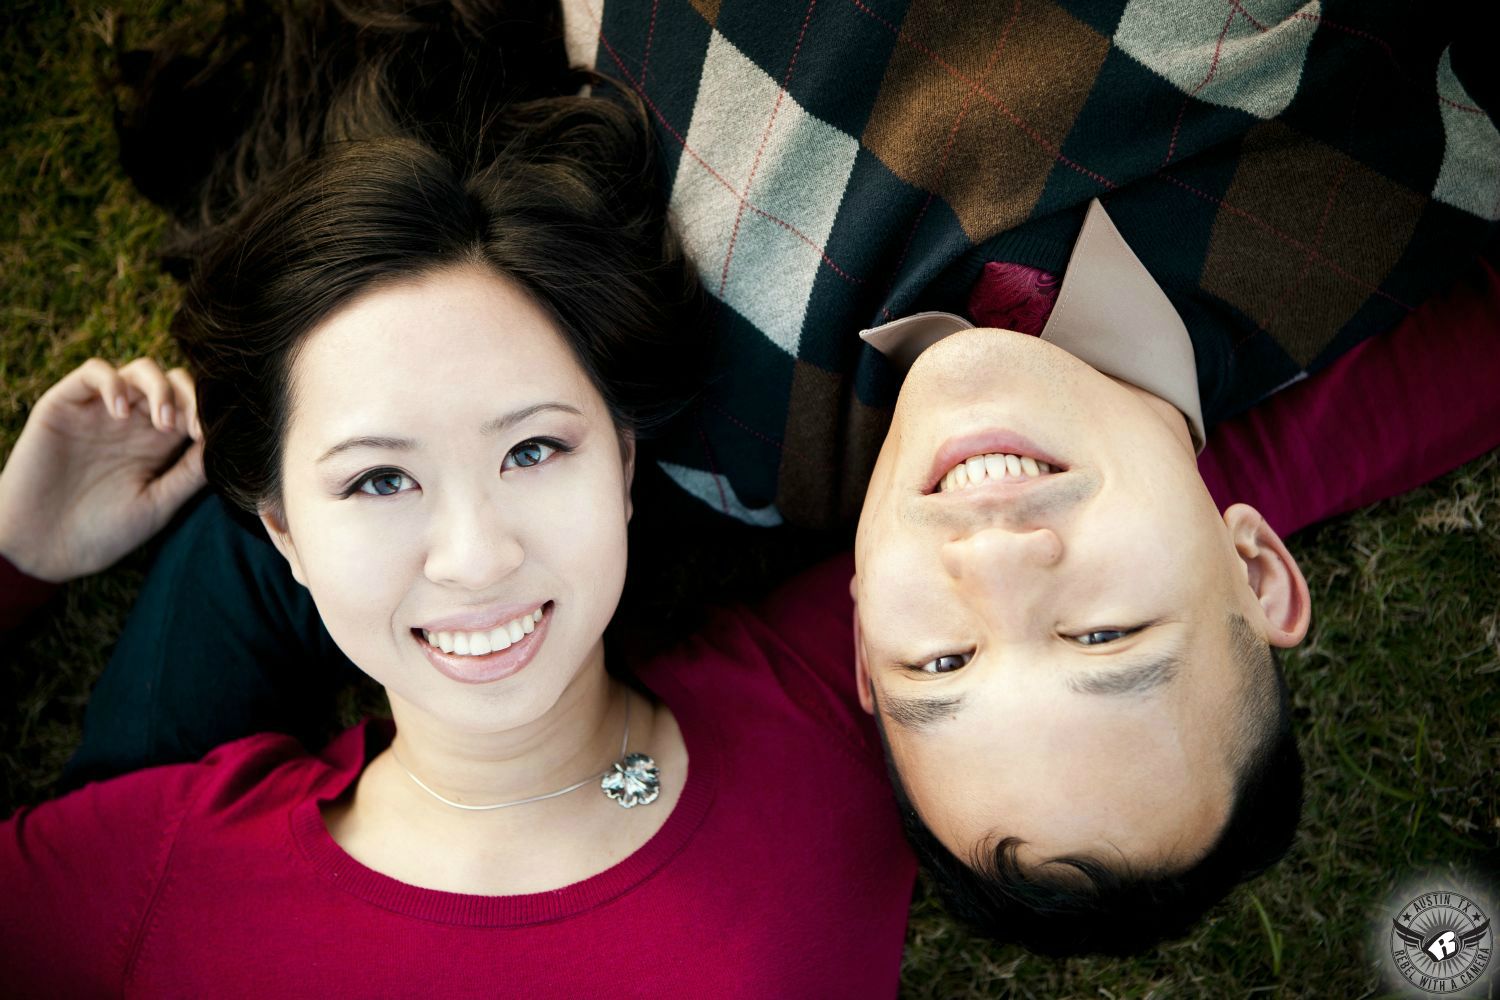 Asian girl with dark hair wearing a red blouse with an infectious smile lies in grass next to a Asian brunette guy  wearing a  checkered sweater at Zilker Park in this flipped engagement photo in Austin.